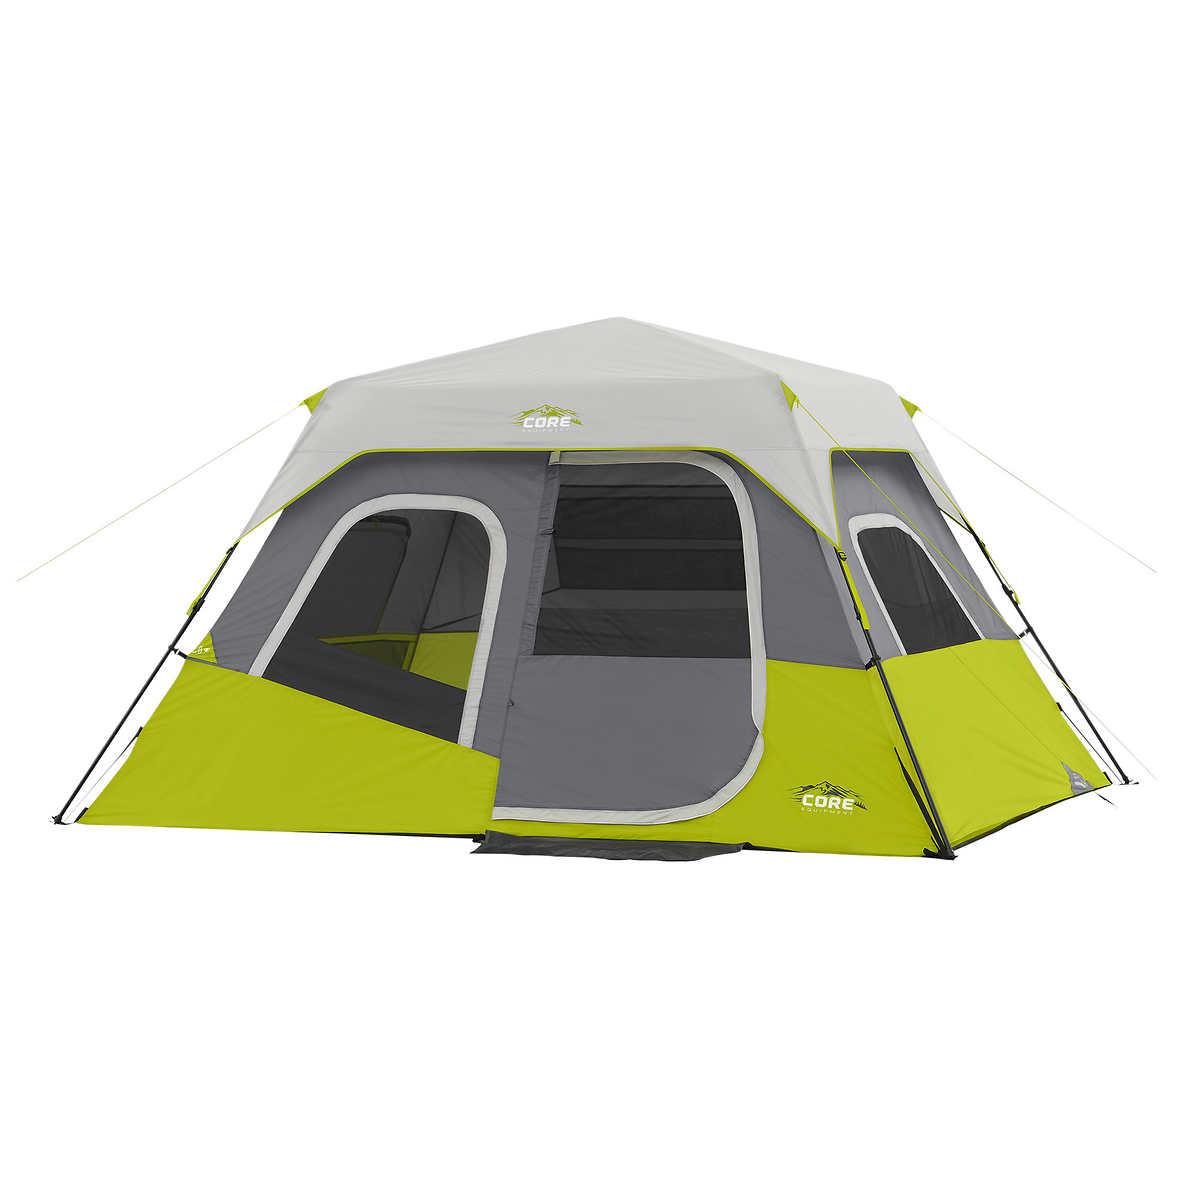 17+ Camping Tent 6 Person Price